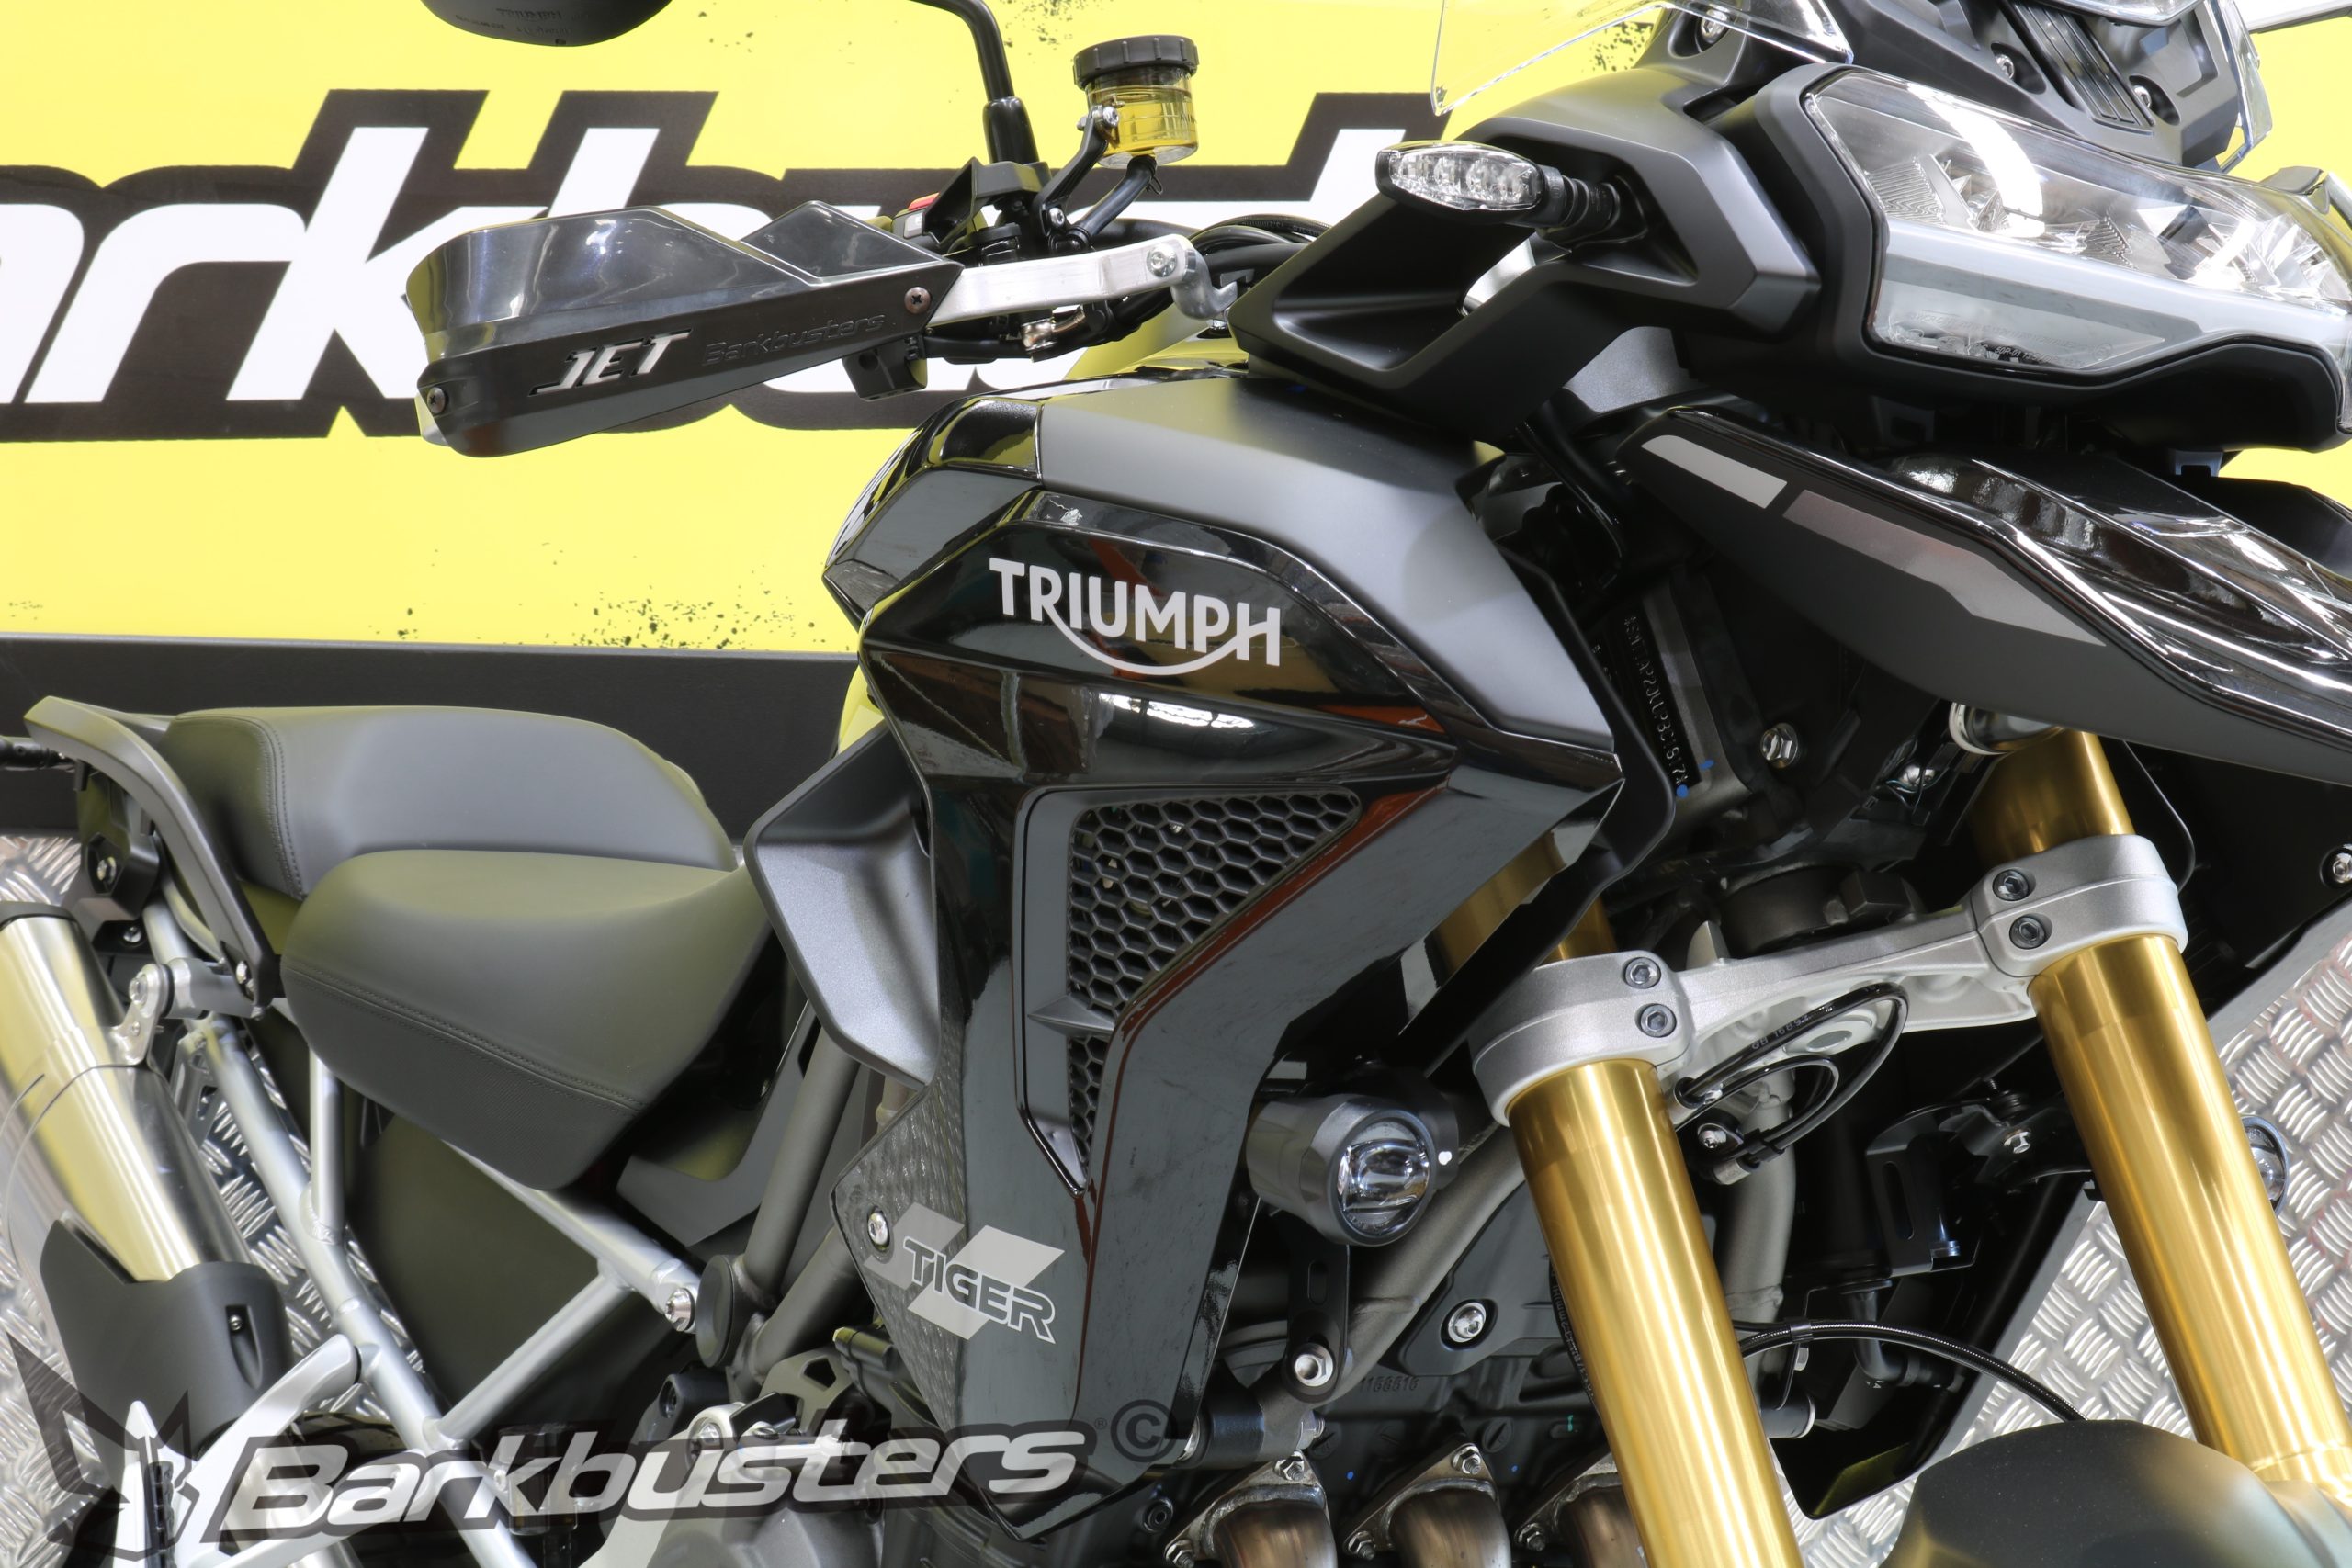 Tiger 1200 Rally Pro with Barkbusters JET Handguards